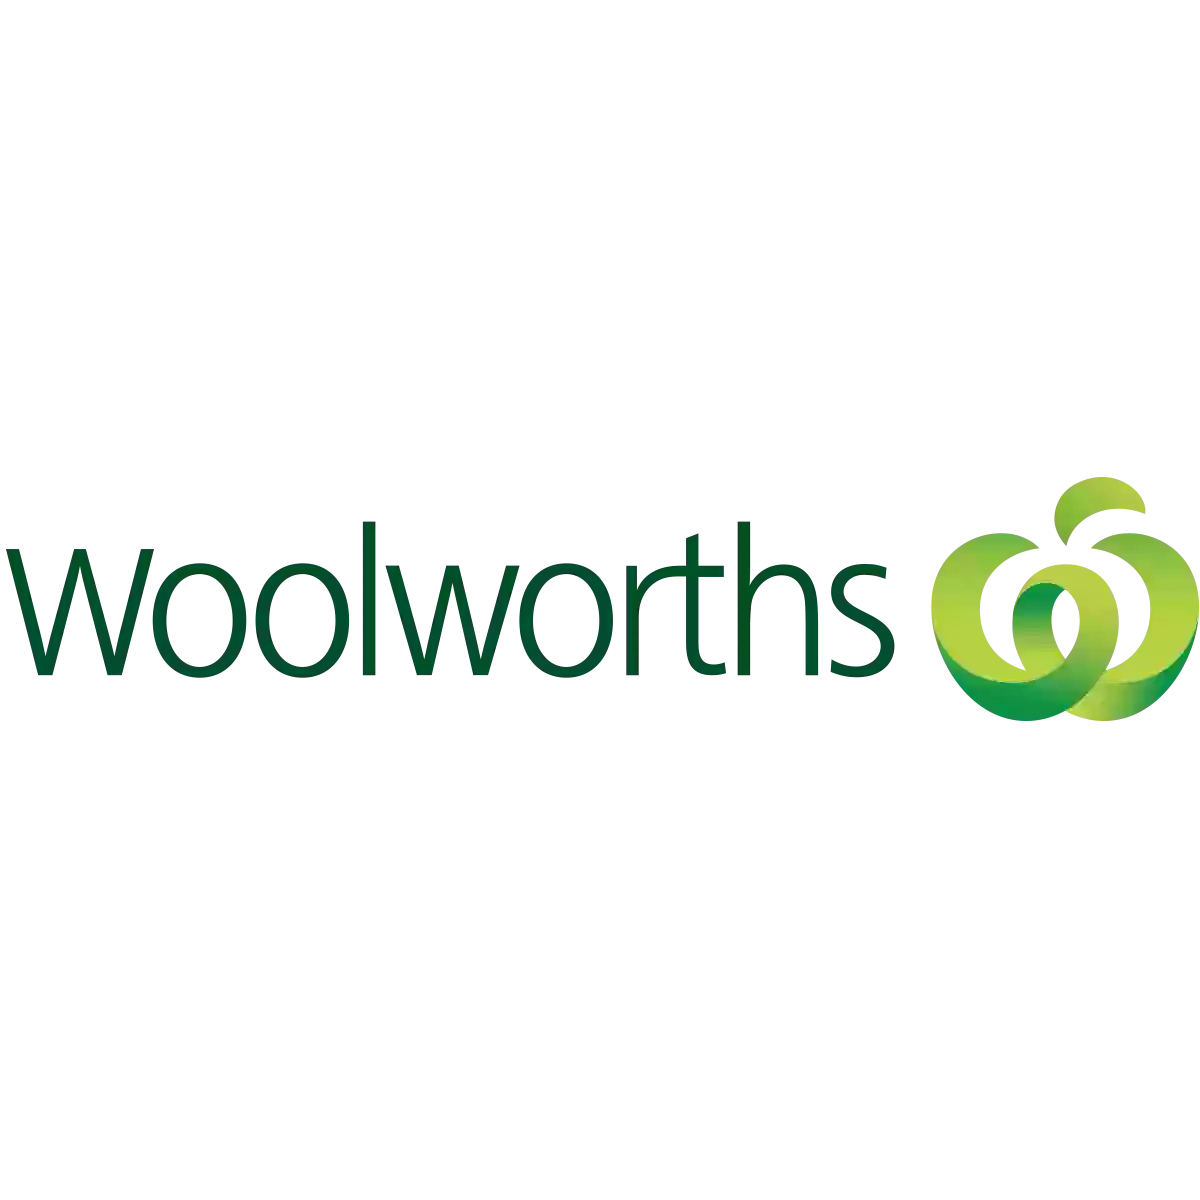 Woolworths Green Valley